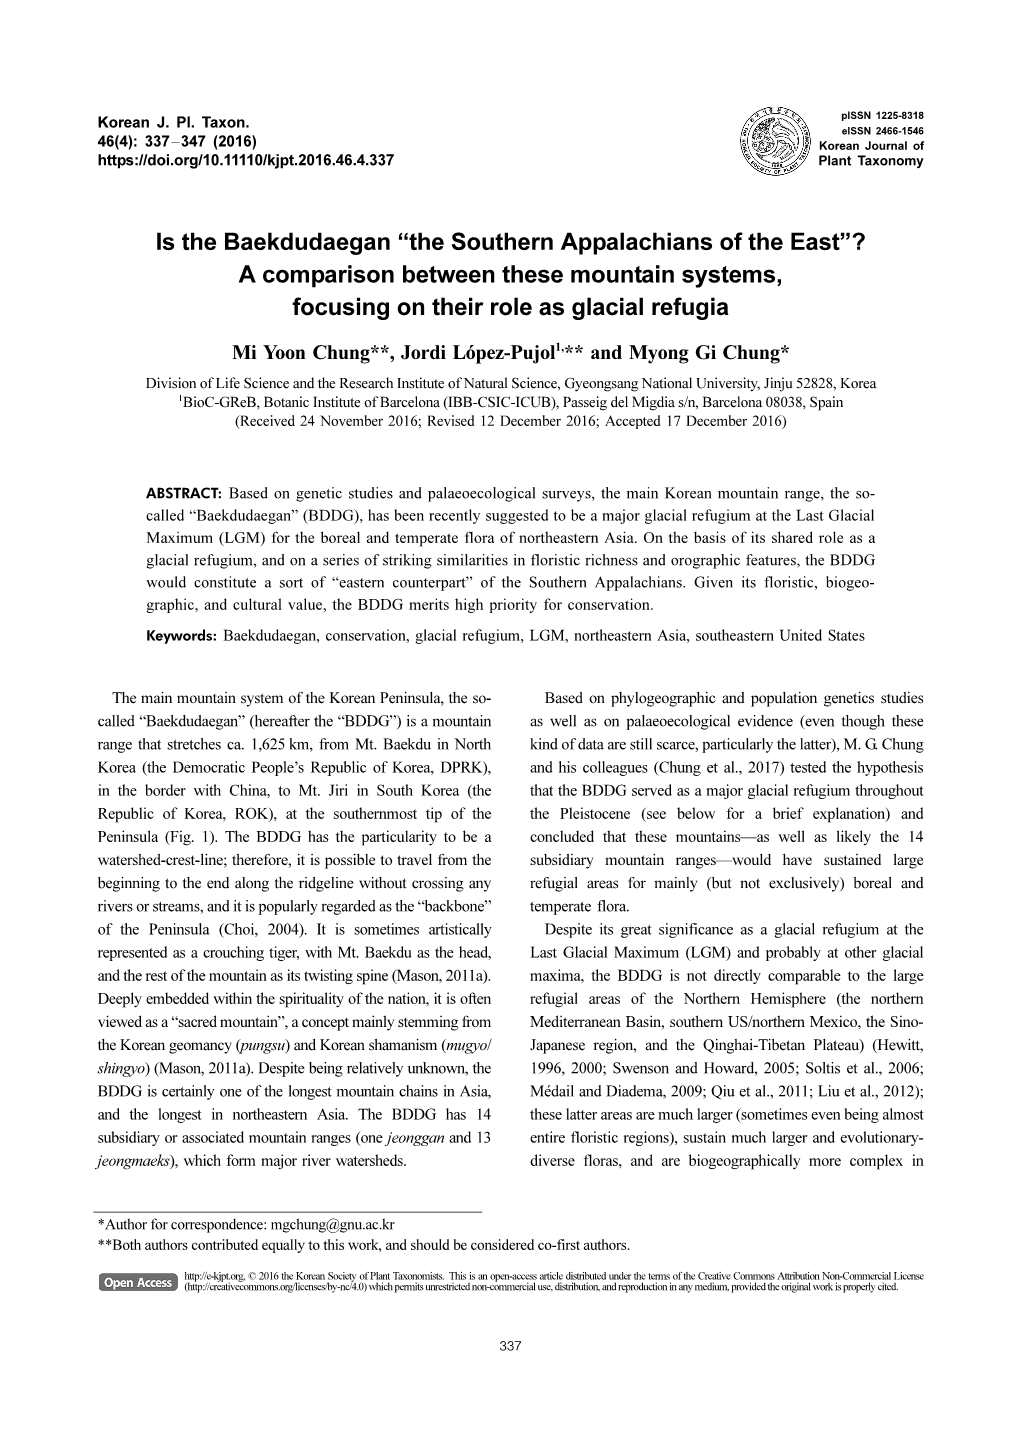 Is the Baekdudaegan “The Southern Appalachians of the East”? a Comparison Between These Mountain Systems, Focusing on Their Role As Glacial Refugia